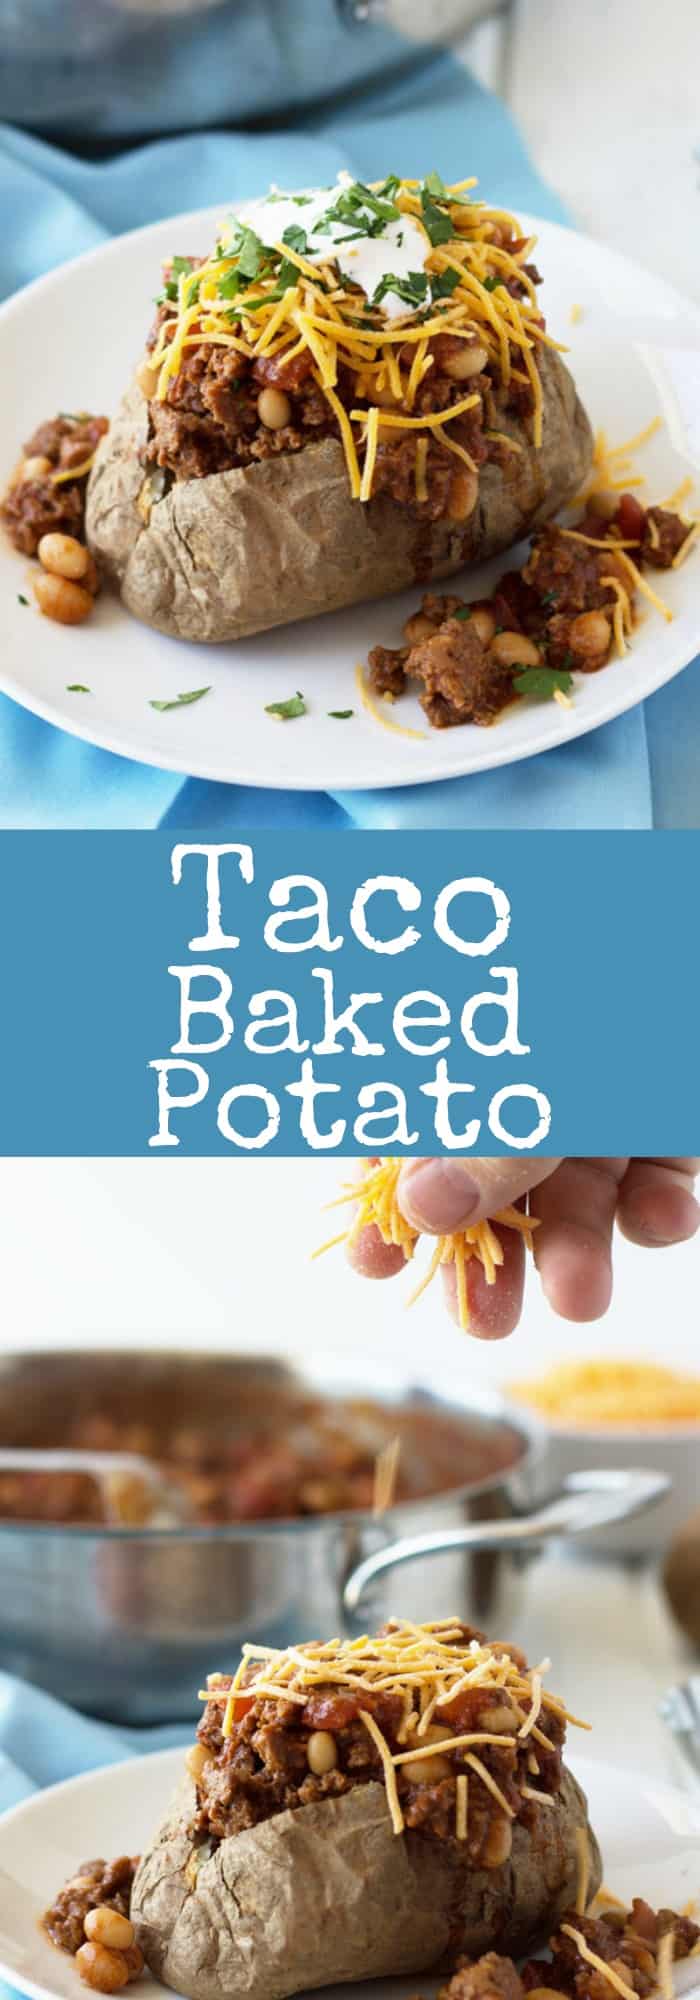 Taco Baked Potatoes are a great way to use up leftover baked potatoes and make for a super satisfying dinner! | www.countrysidecravings.com